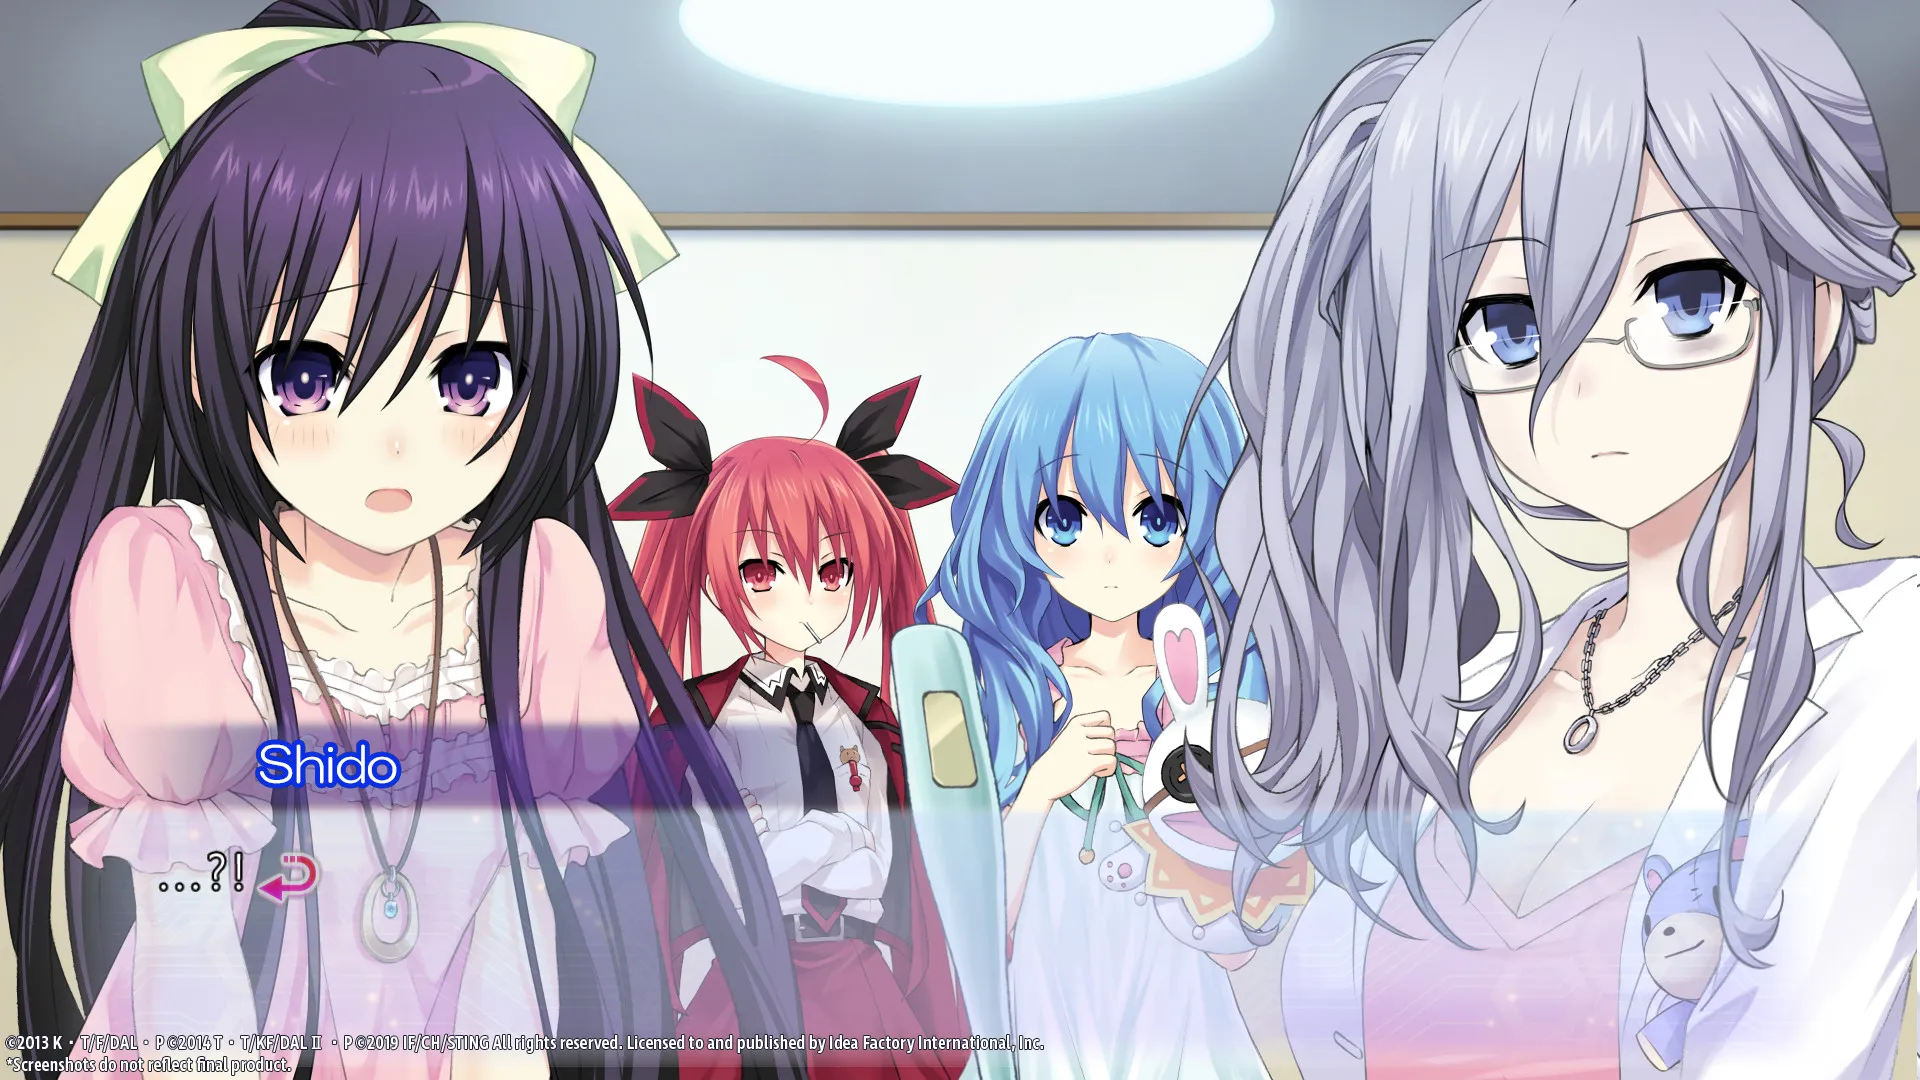 Where to Watch & Read Date A Live